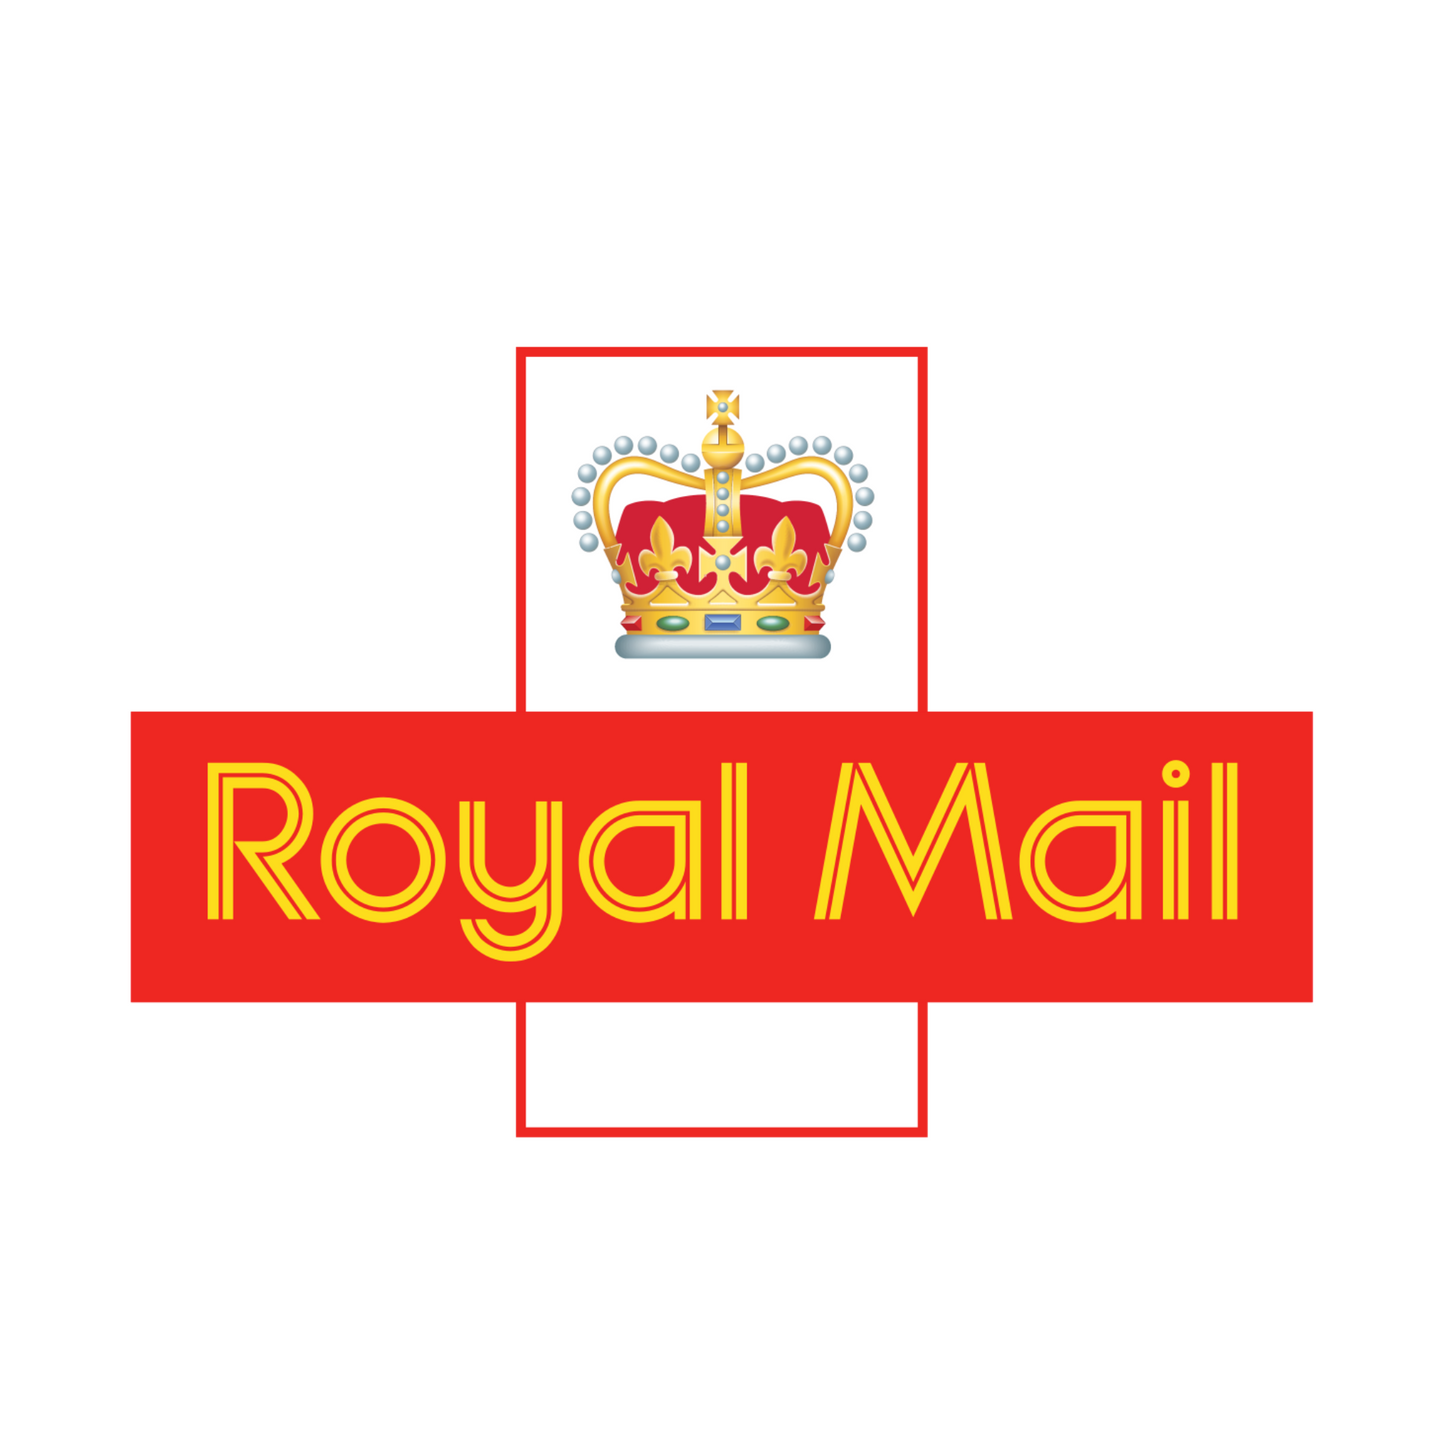 Postage (Royal Mail 2nd Class)